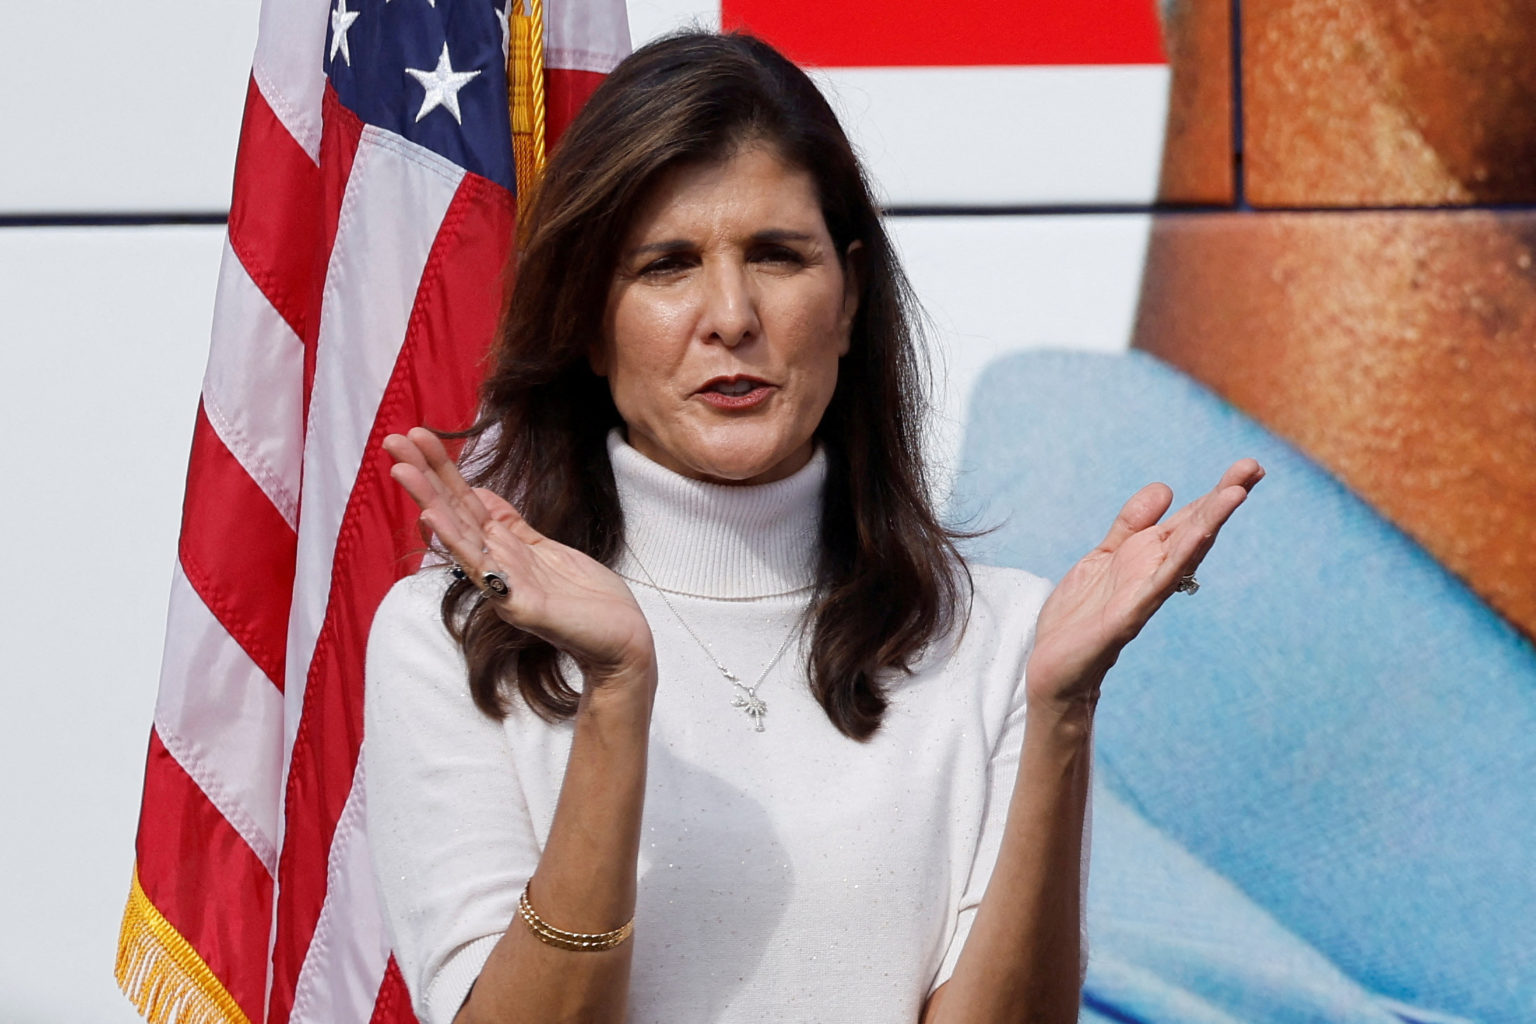 Nikki Haley, once Trump's UN ambassador, to take him on in 2024